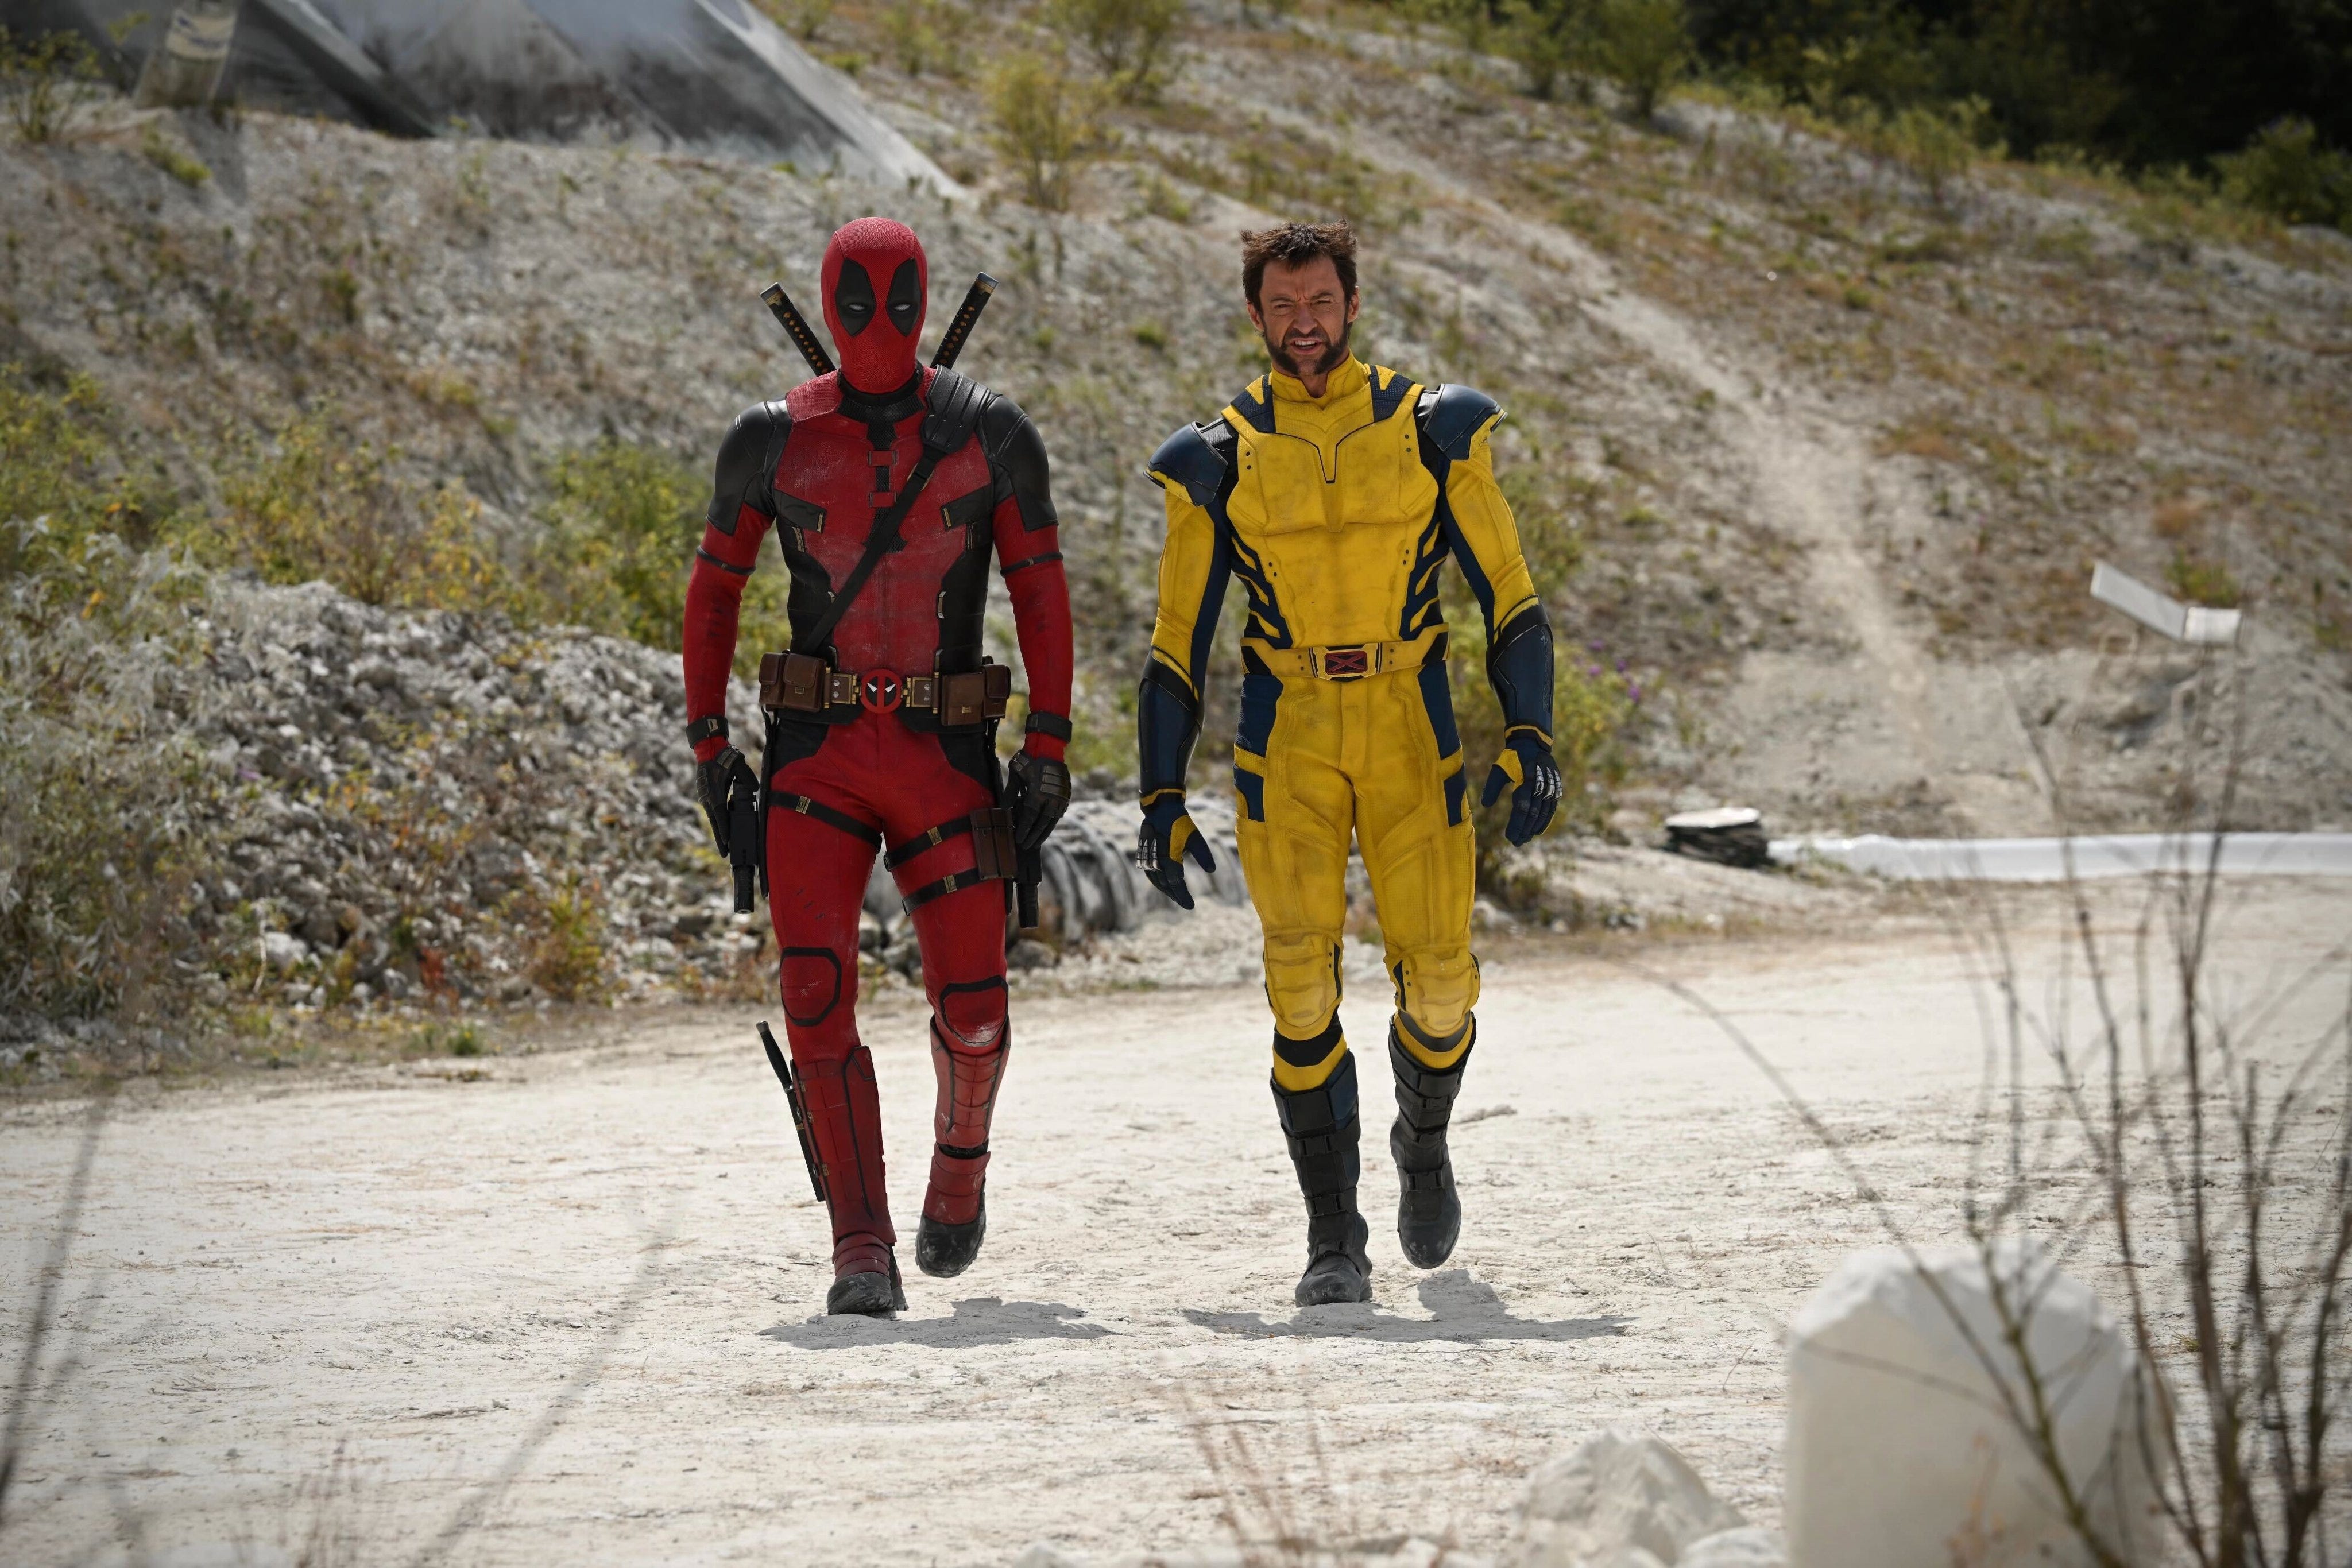 <p>Reynolds surprised fans <a href="https://www.insider.com/ryan-reynolds-teases-hugh-jackman-wolverine-deadpool-3-2022-9">with a video update</a> to the third movie in 2022, announcing that his pal Hugh Jackman will reprise his role as X-Men fan-favorite Wolverine.</p><p>In an 80-second video, Reynolds said he wanted Deadpool's entry into the Marvel Cinematic Universe to be special and true to character. His one idea involved asking Jackman to play Wolverine "one more time." </p><p>The video ended with the "Deadpool" logo getting slashed by one of Wolverine's adamantium claws. </p><p>The anticipated sequel, directed by Reynolds' frequent collaborator, Shawn Levy, will also star Morena Baccarin, Brianna Hildebrand, Emma Corrin, and Rob Delaney. In addition to Jackman's reprisal, reports and rumors claim that fans could also be in store for a lot of familiar faces from Marvel's past in the new film.</p><p>The latest update moved the film up from fall 2024. It's unclear if it may shift again due to the SAG-AFTRA strike.</p>